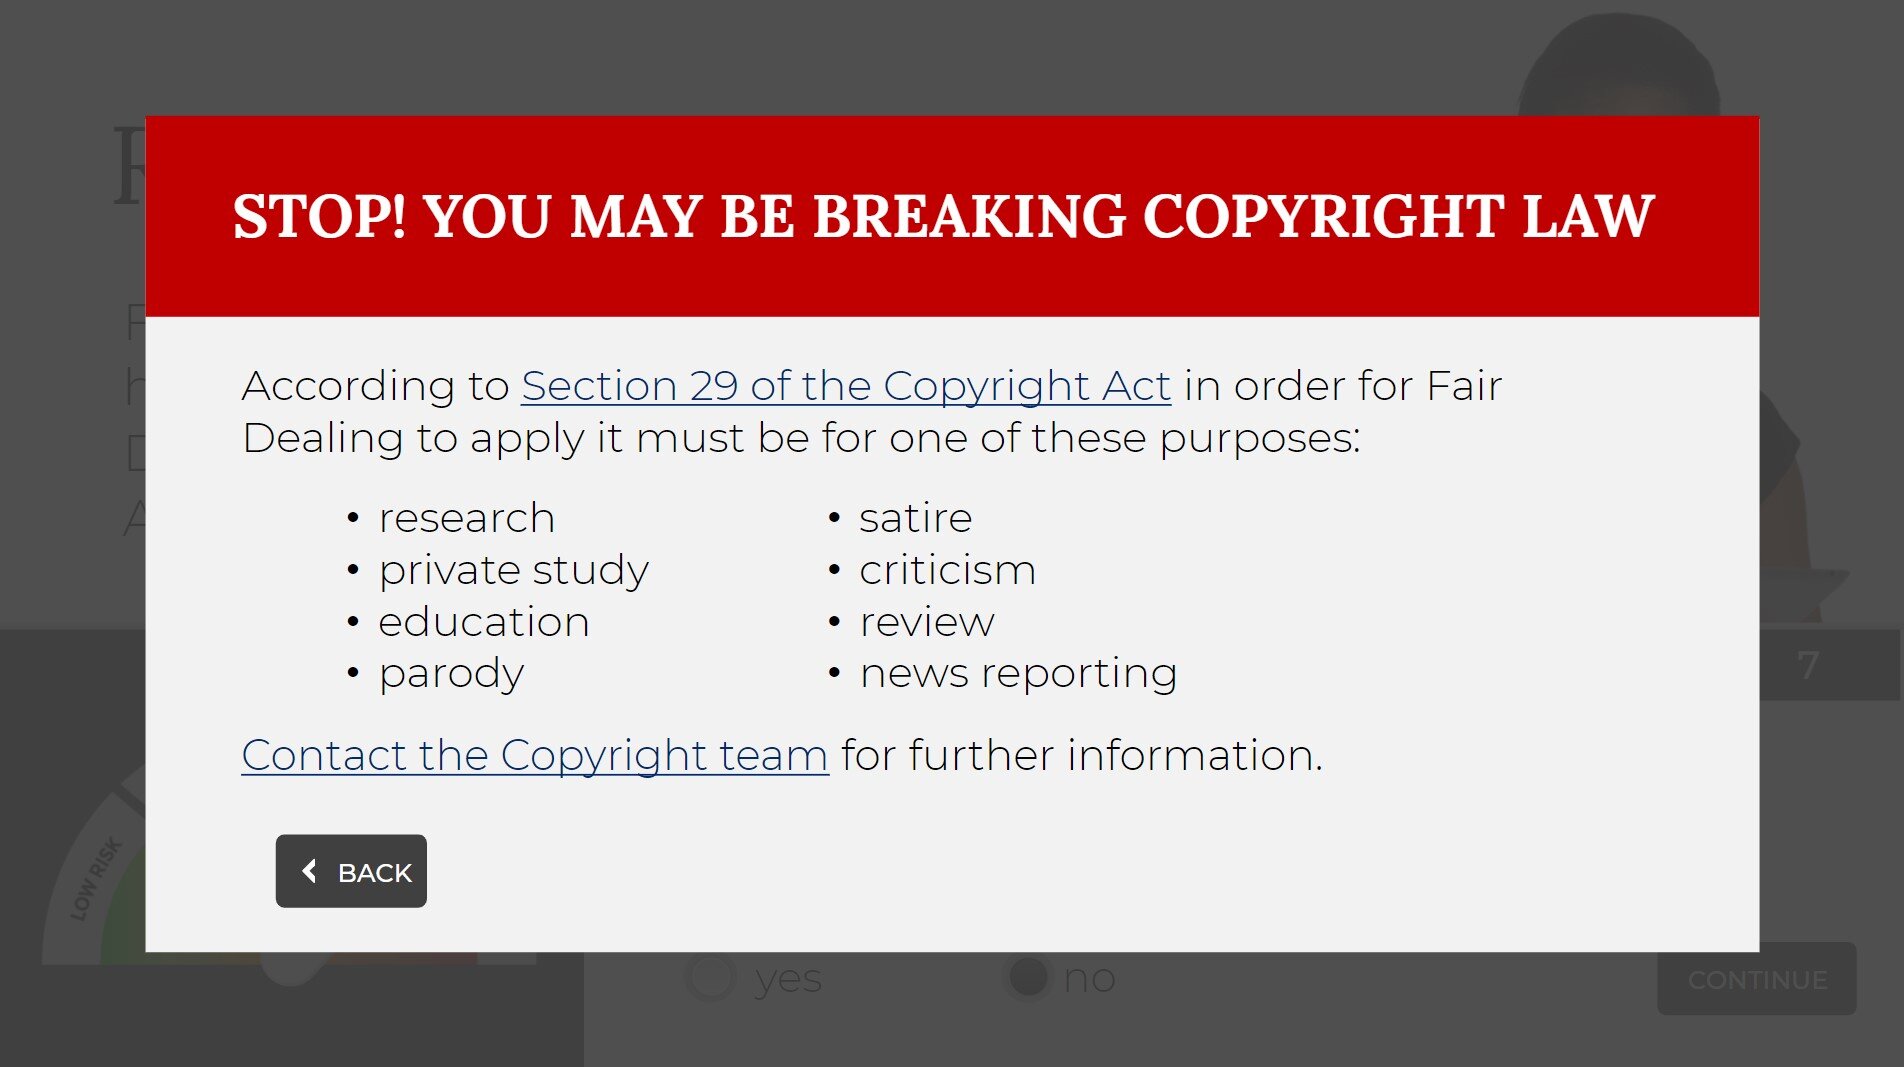  An alert page that appears when an activity selected clearly infringes Copyright Law. 